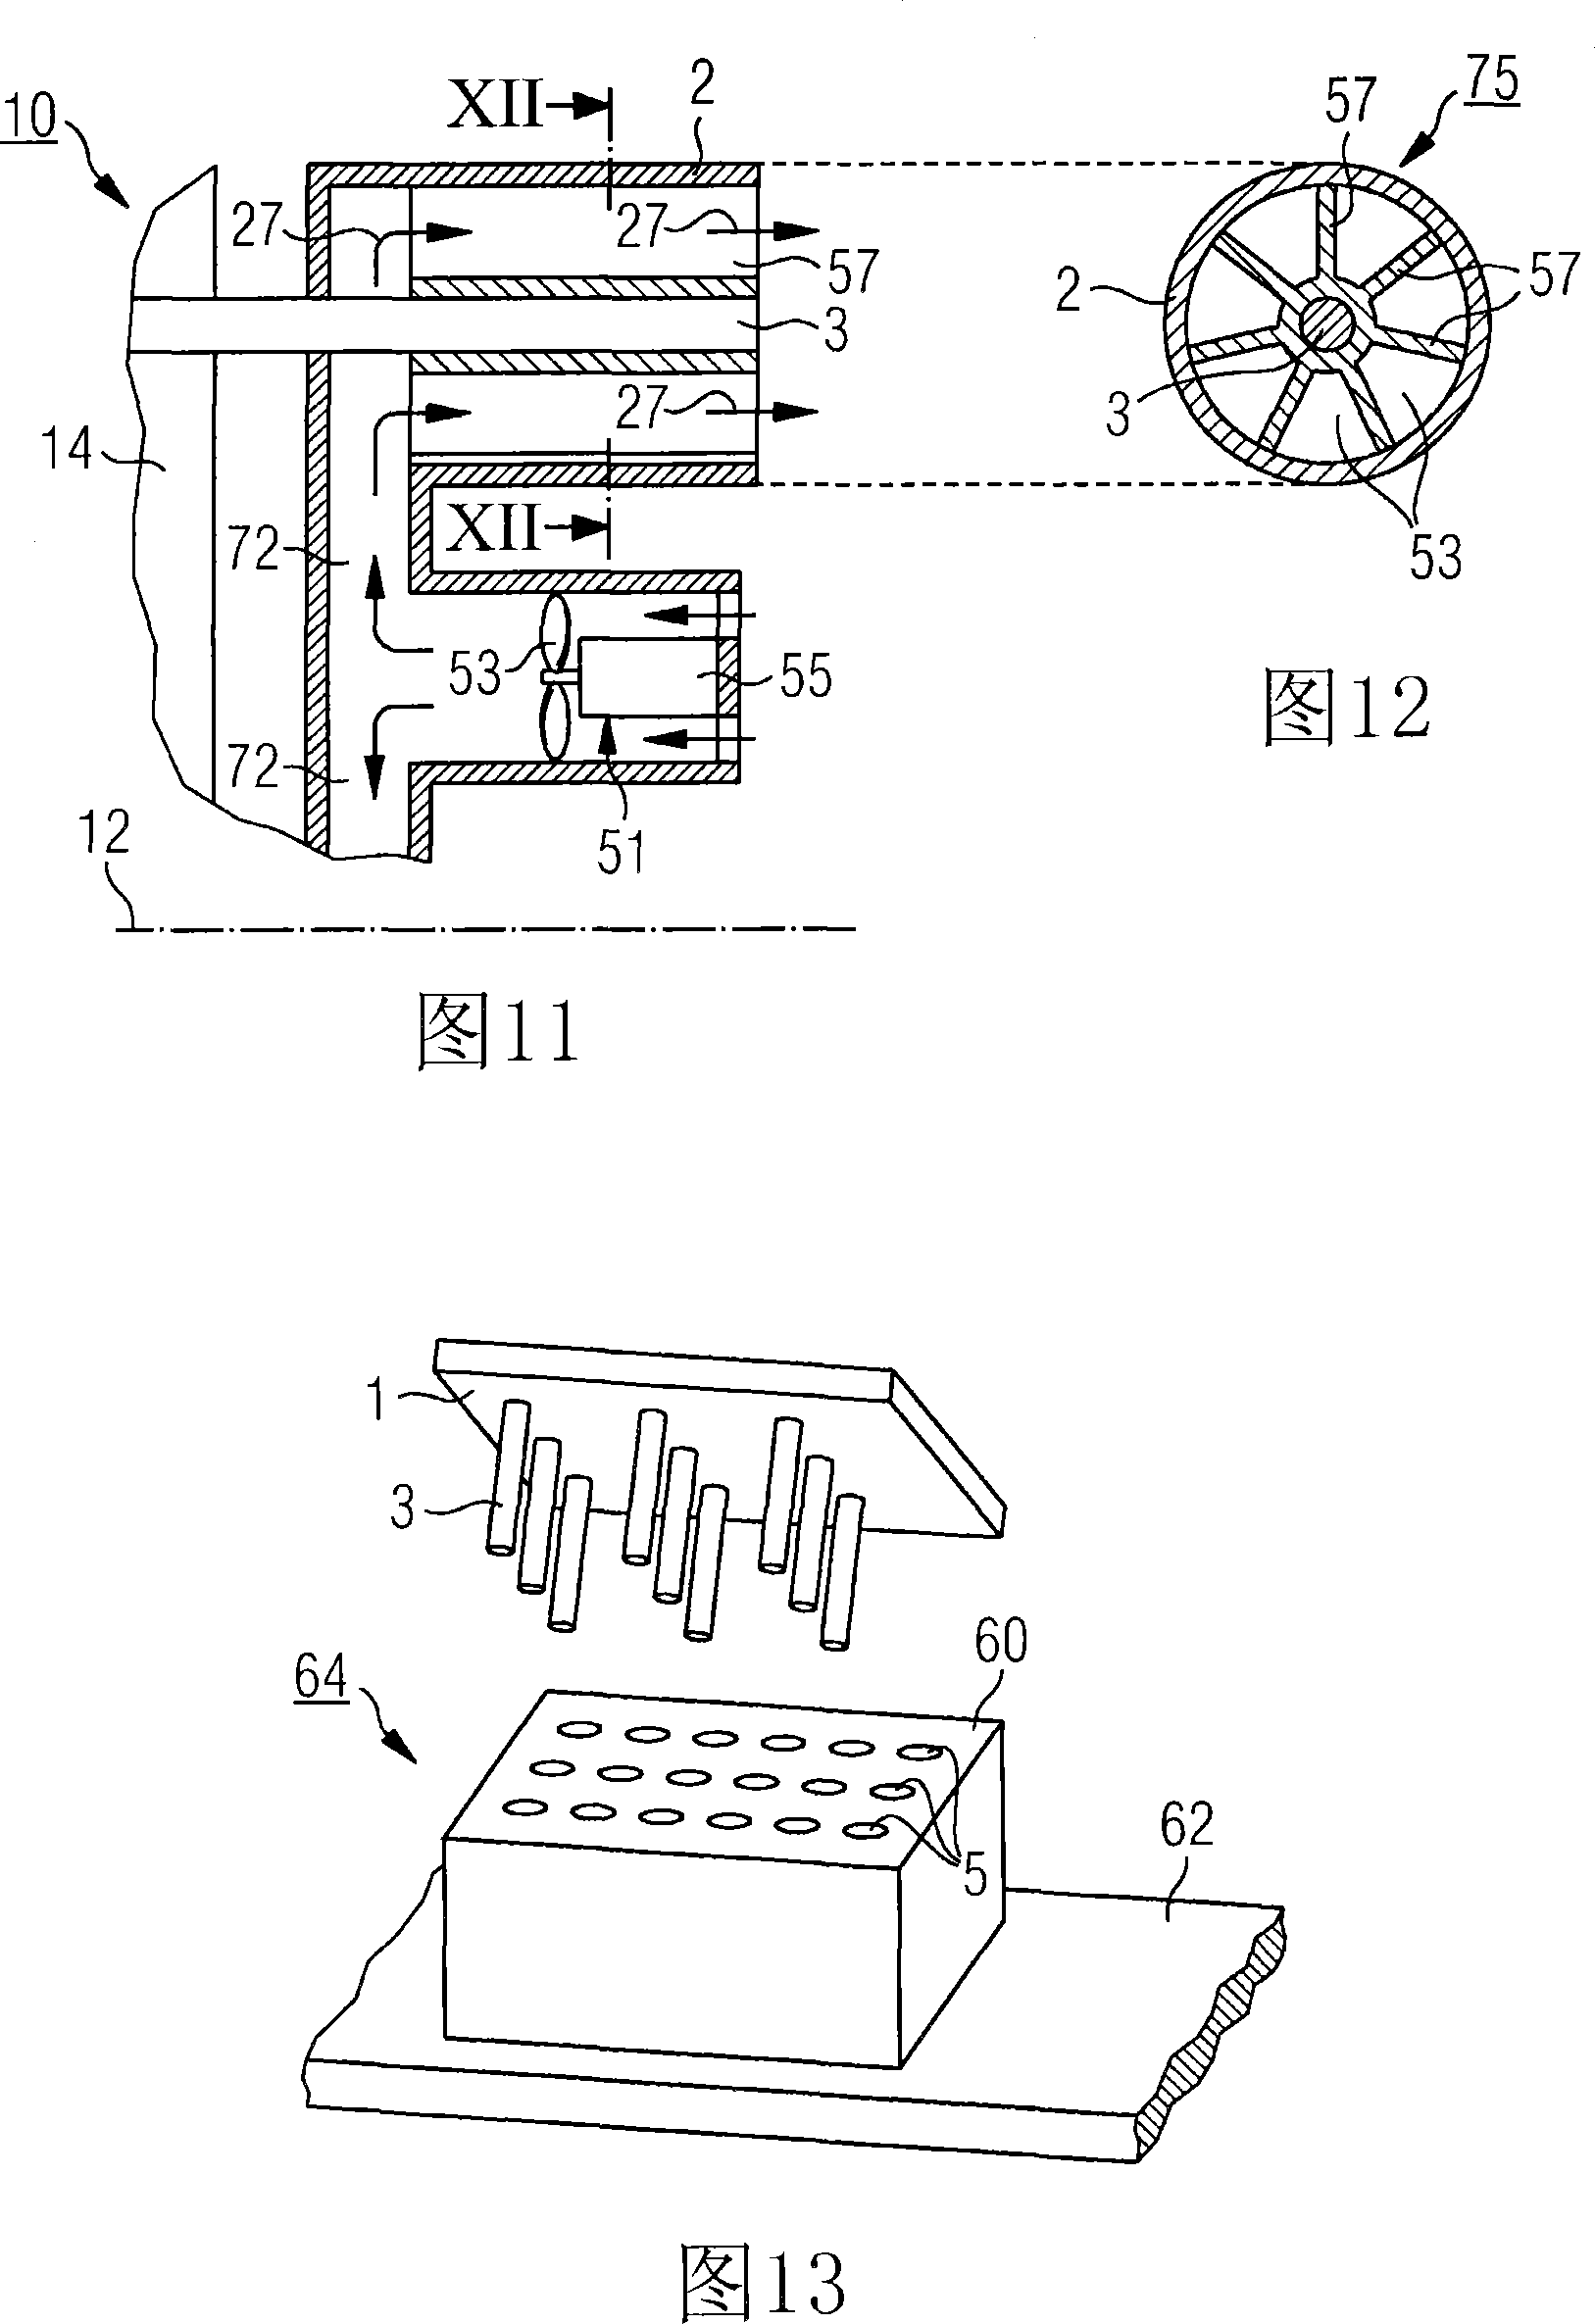 Cooling device pertaining to an electrical machine